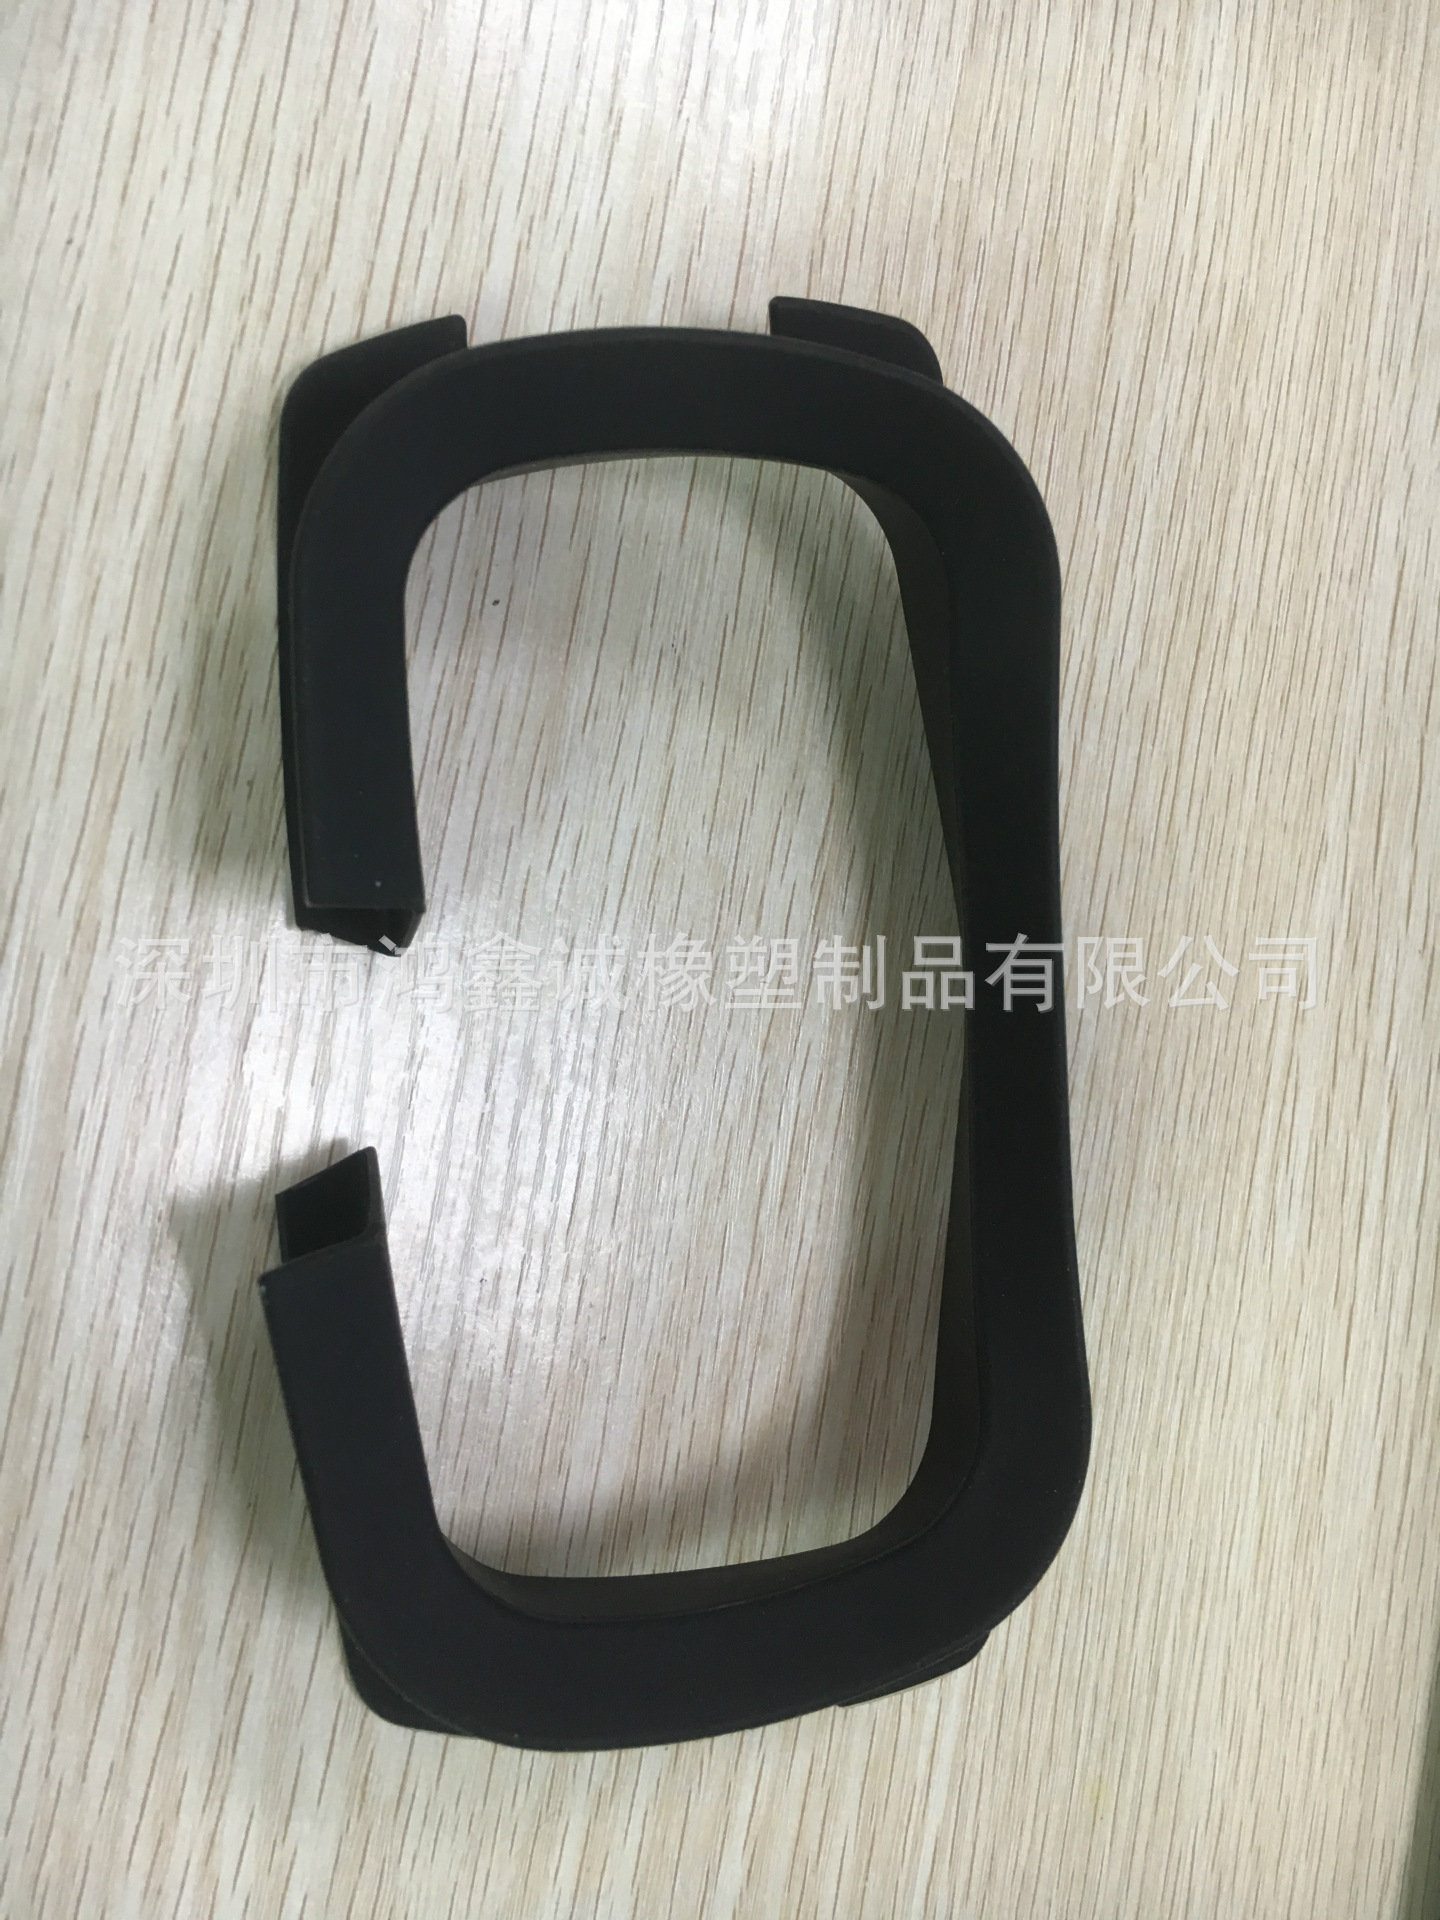 customized silica gel glasses Shell VR glasses Eye mask Bandage silica gel parts design Mold 3D Glasses accessories